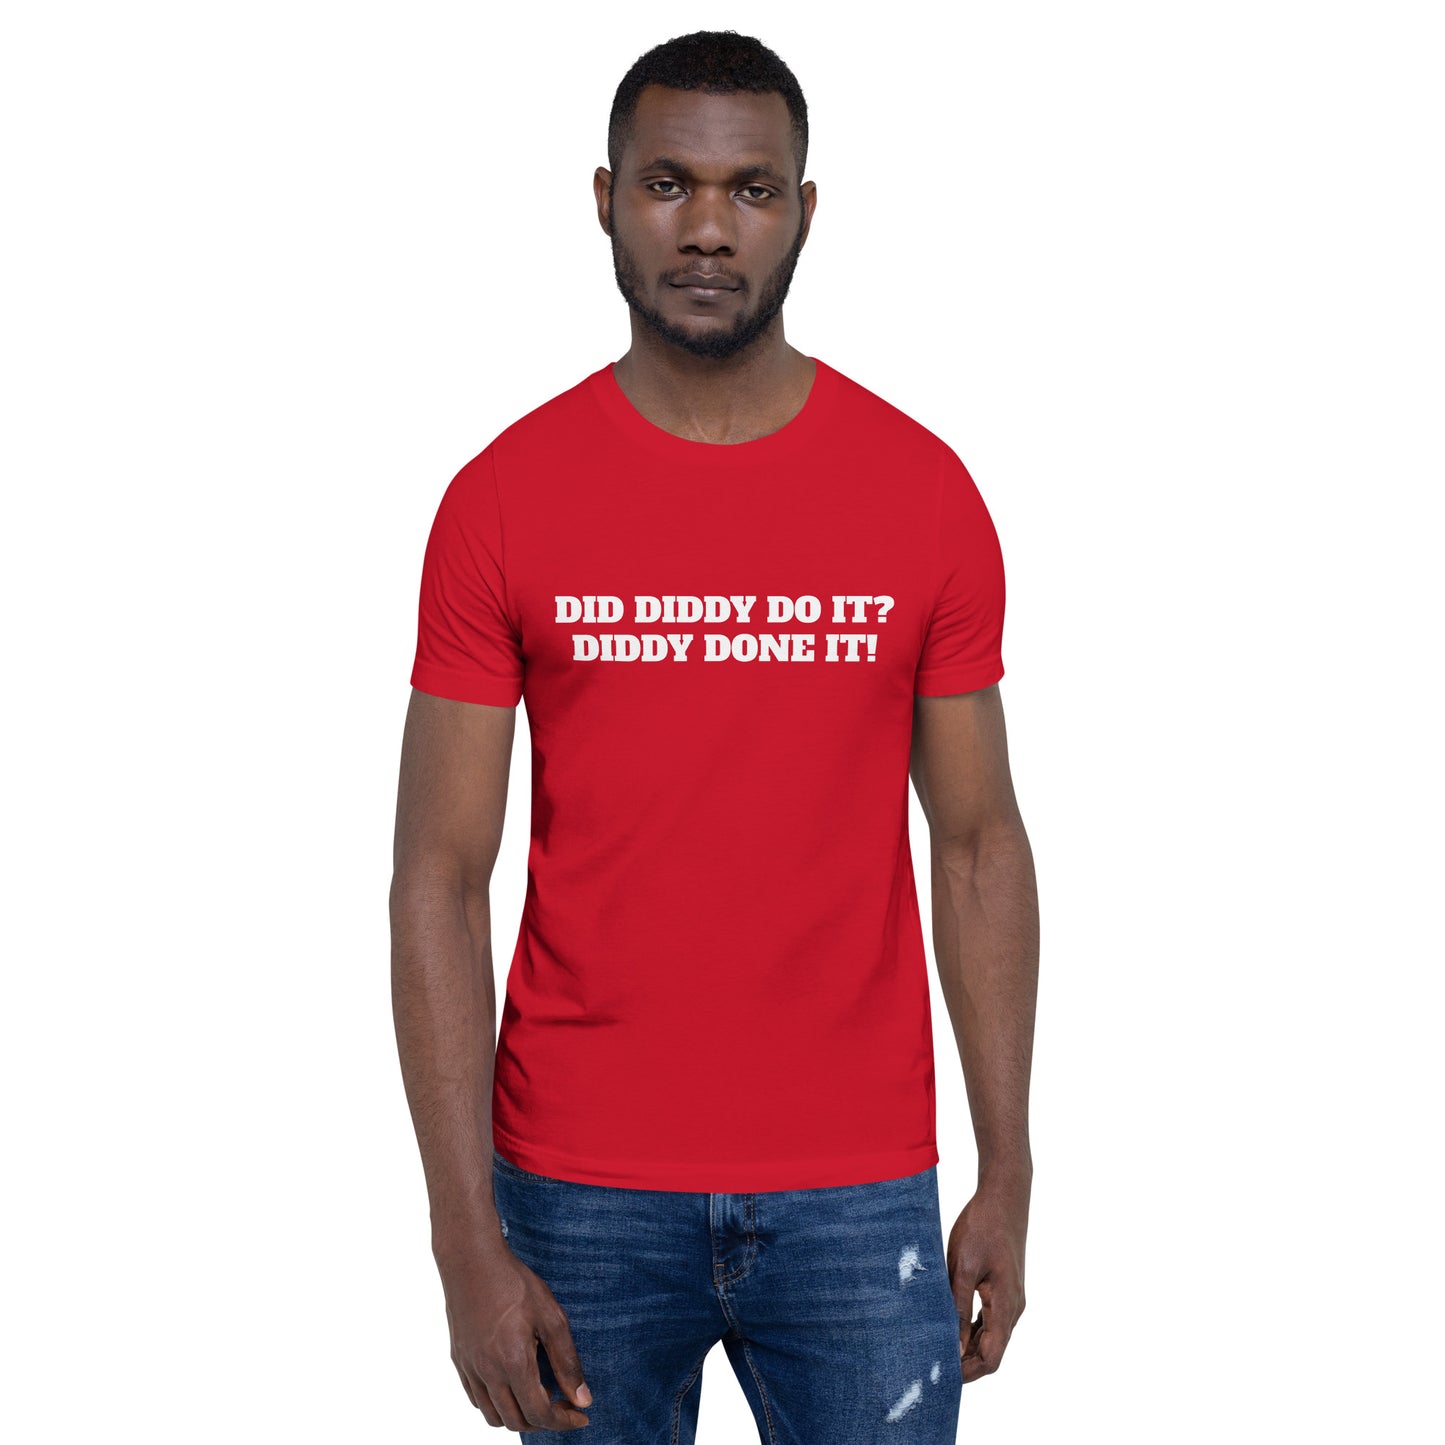 DID DIDDY DO IT? Unisex t-shirt